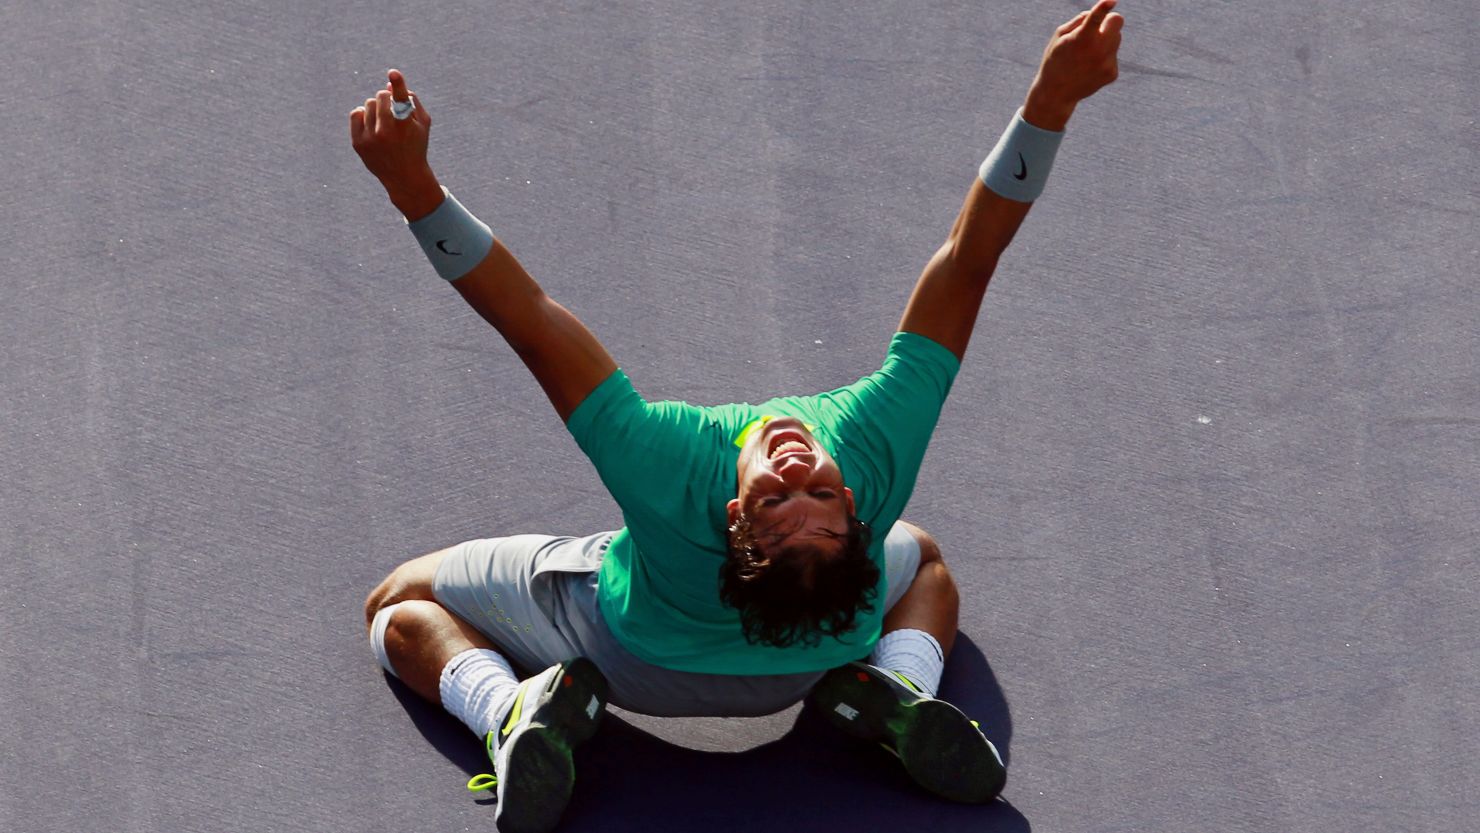 Rafael Nadal is excited to be back at the BNP Paribas Open, a tournament he has won three times. 